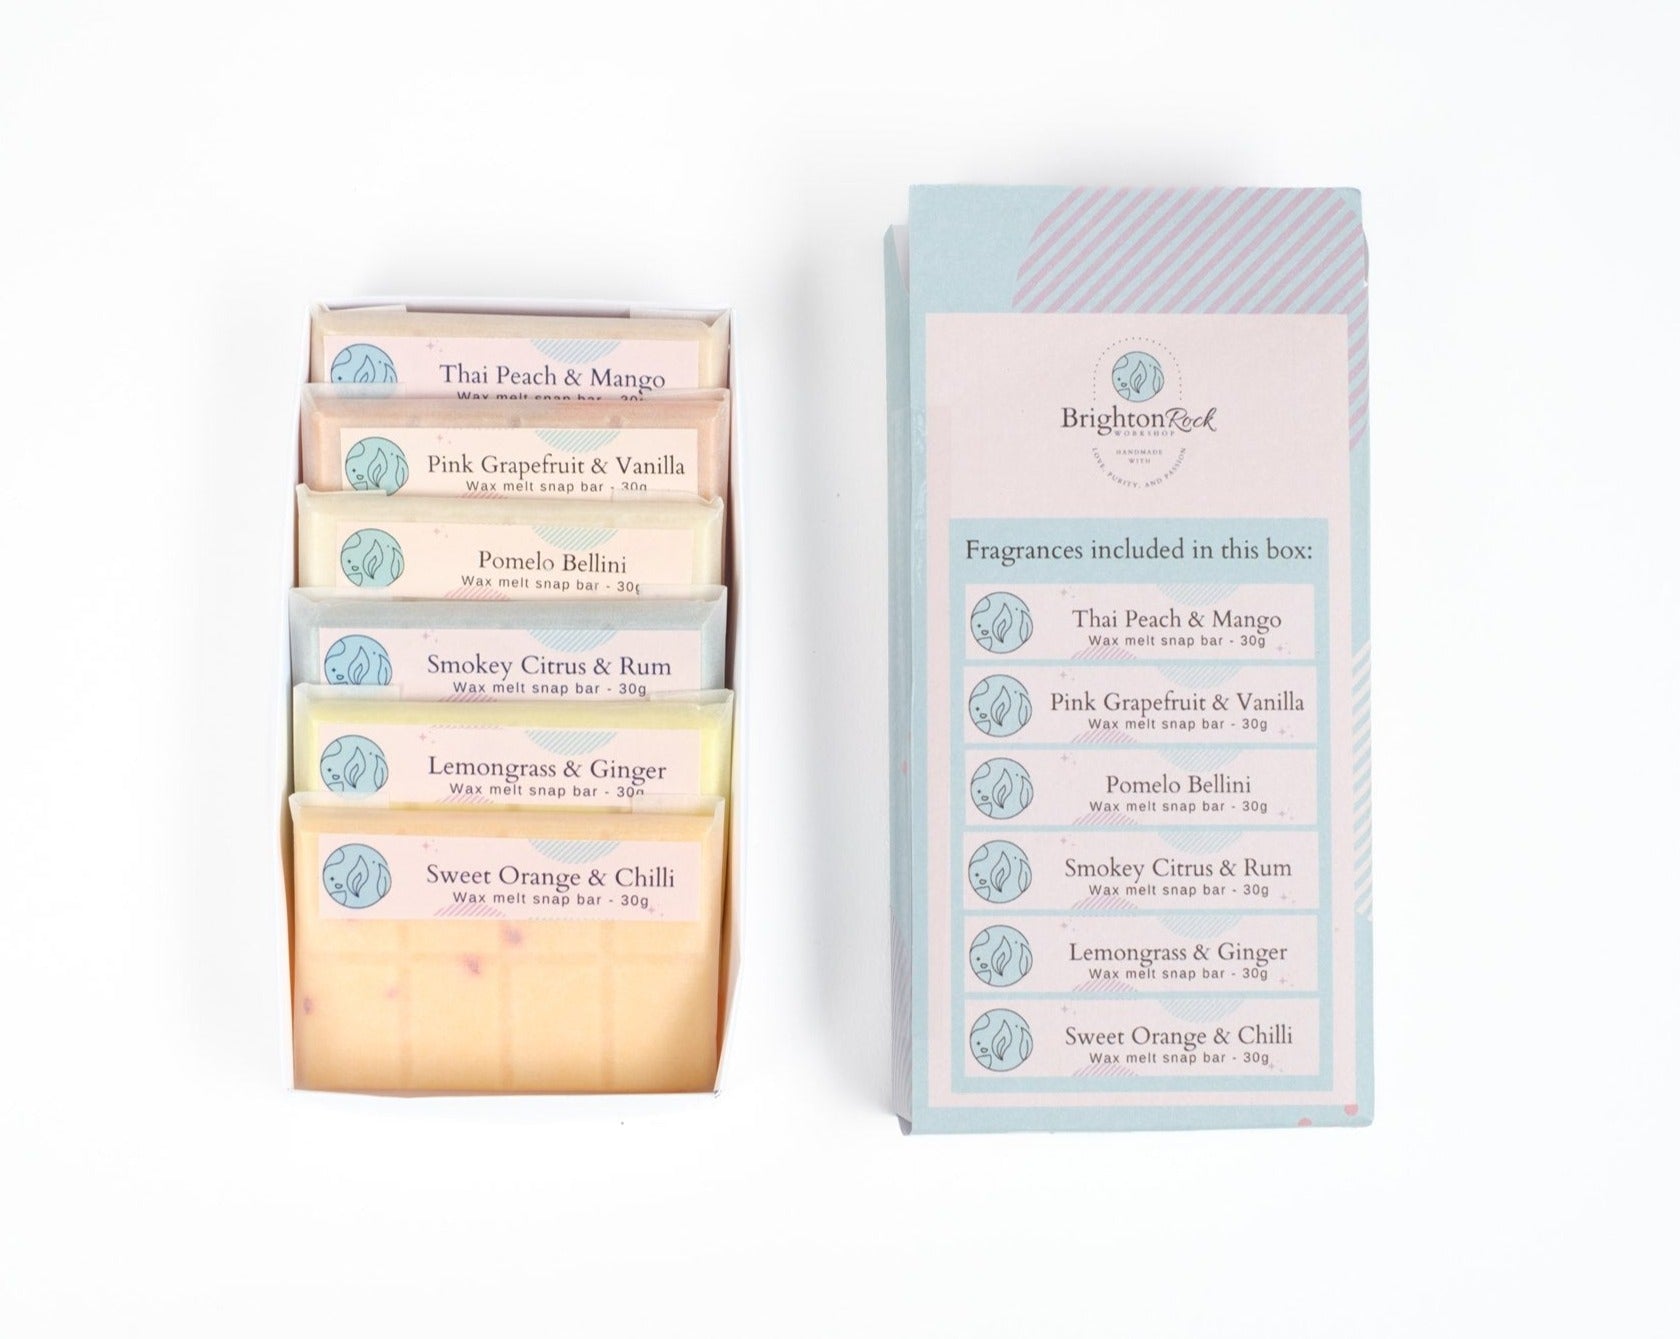 Citrus fragrances Brighton Rock Workshop wax melt snap bar selection box. enjoy 6 strongly scented 30 gram bars in our best selling citrus scents. Eco friendly product and packaging. sustainable, vegan friendly and cruelty free. long-lasting